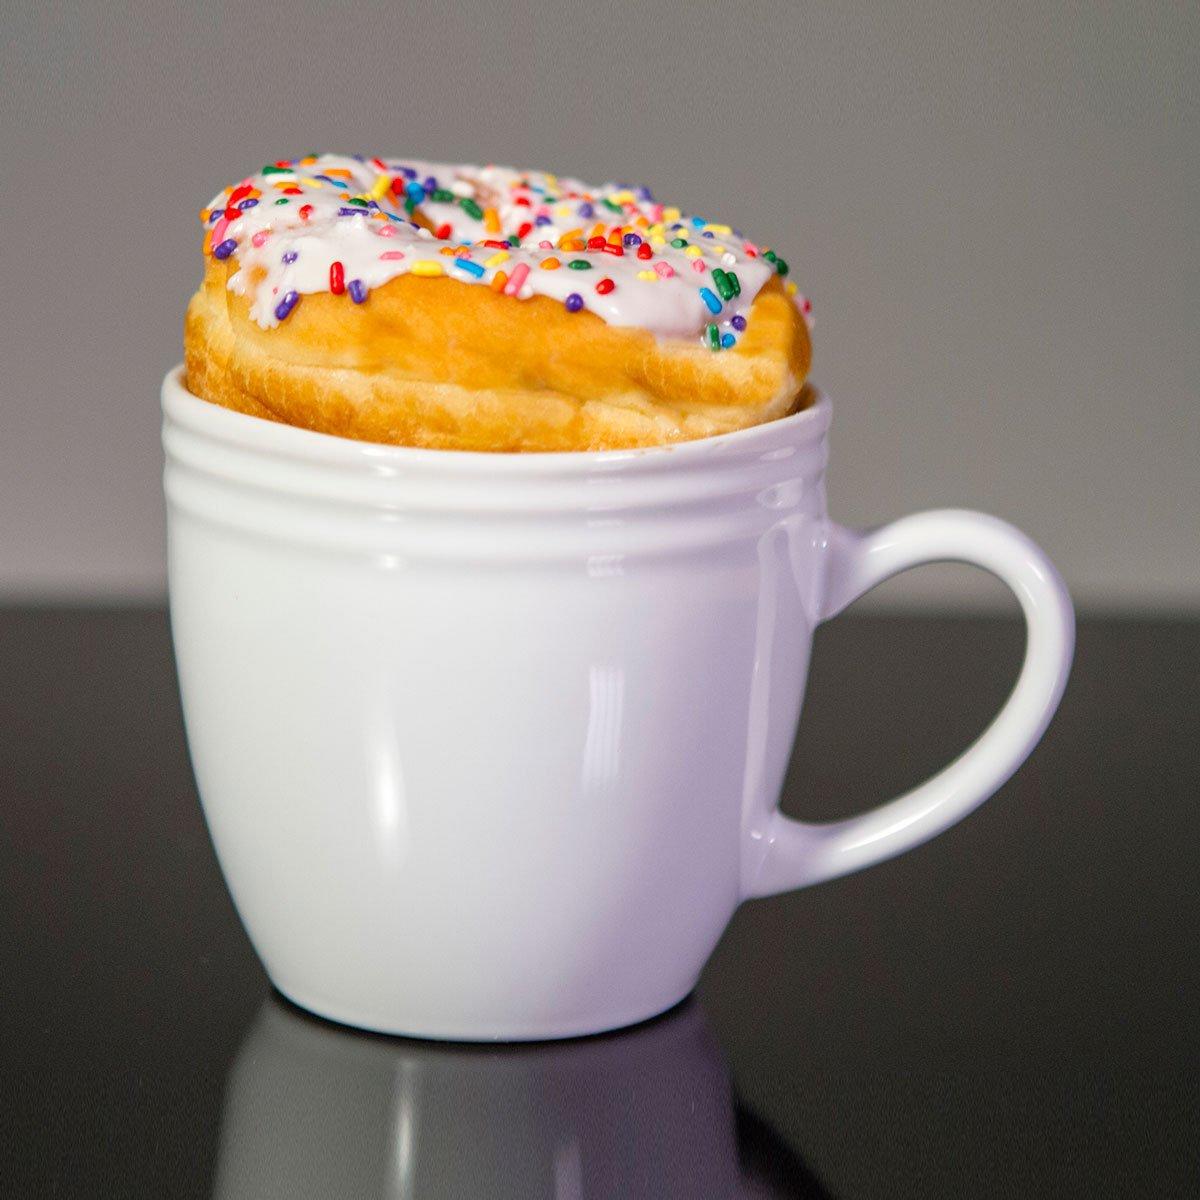 Best Morning Ever Mug - Holds Cookies, Doughnuts, Muffins, Biscuits | Uberstar.com